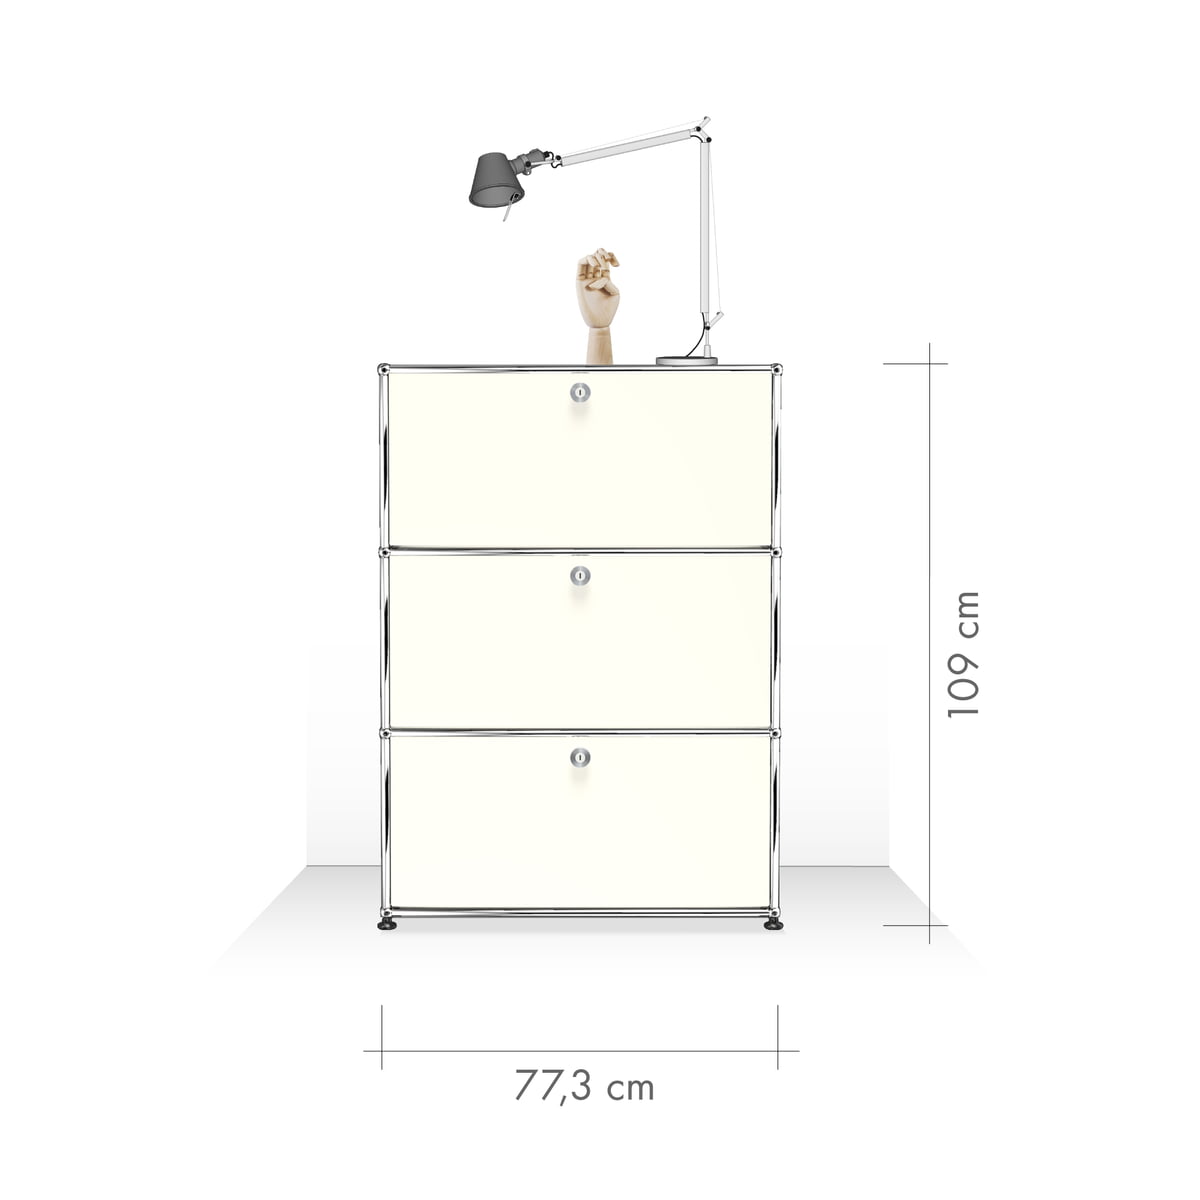 At Home Comforts Luna 160cm White High Gloss Front//Matt Body TV Unit Cabinet Stand with LED Lights and Drawer Large